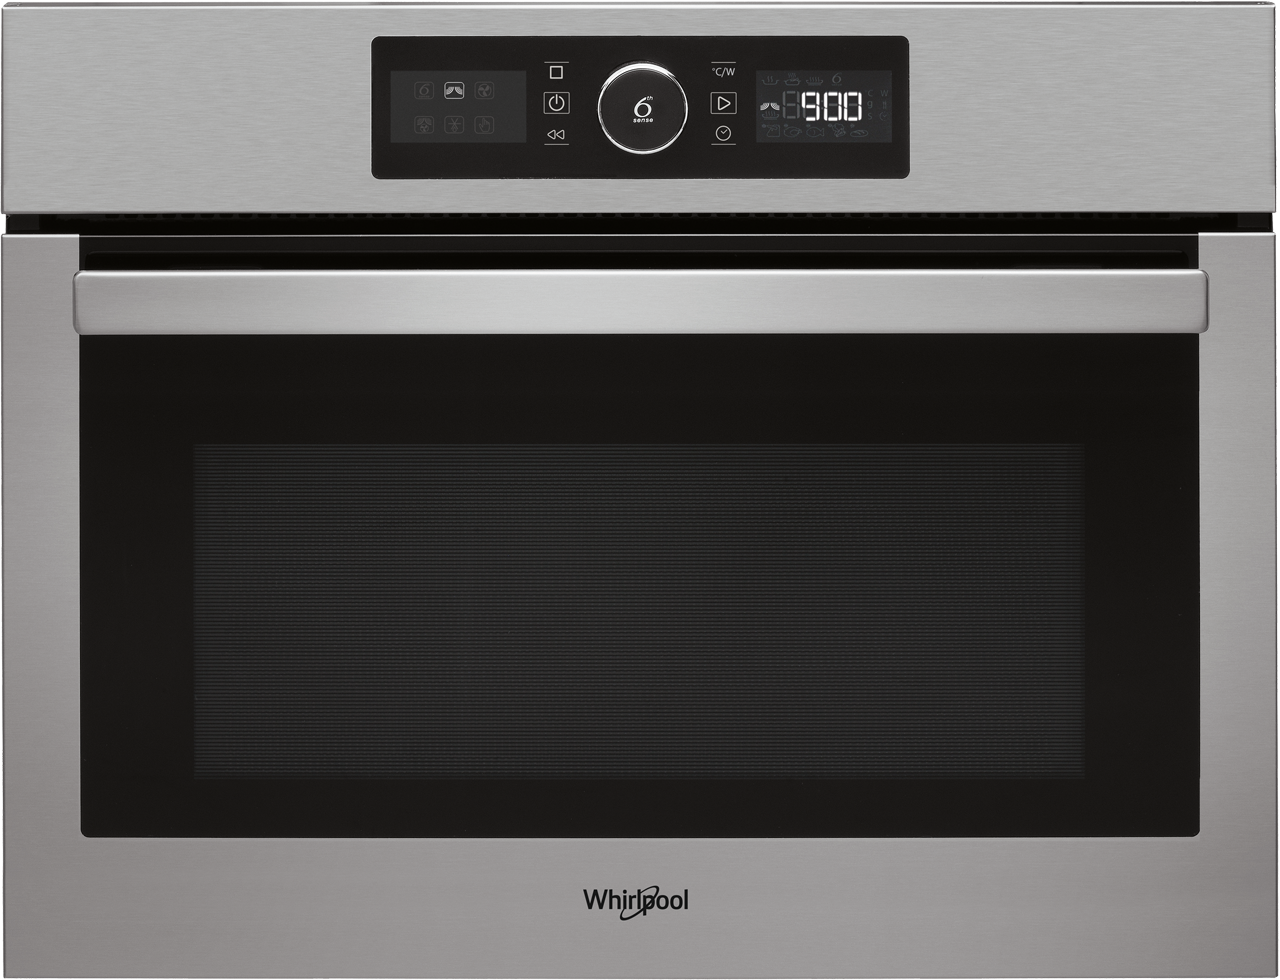 Whirlpool Absolute AMW9615/IXUK 46cm tall, 60cm wide, Built In Microwave - Stainless Steel, Stainless Steel